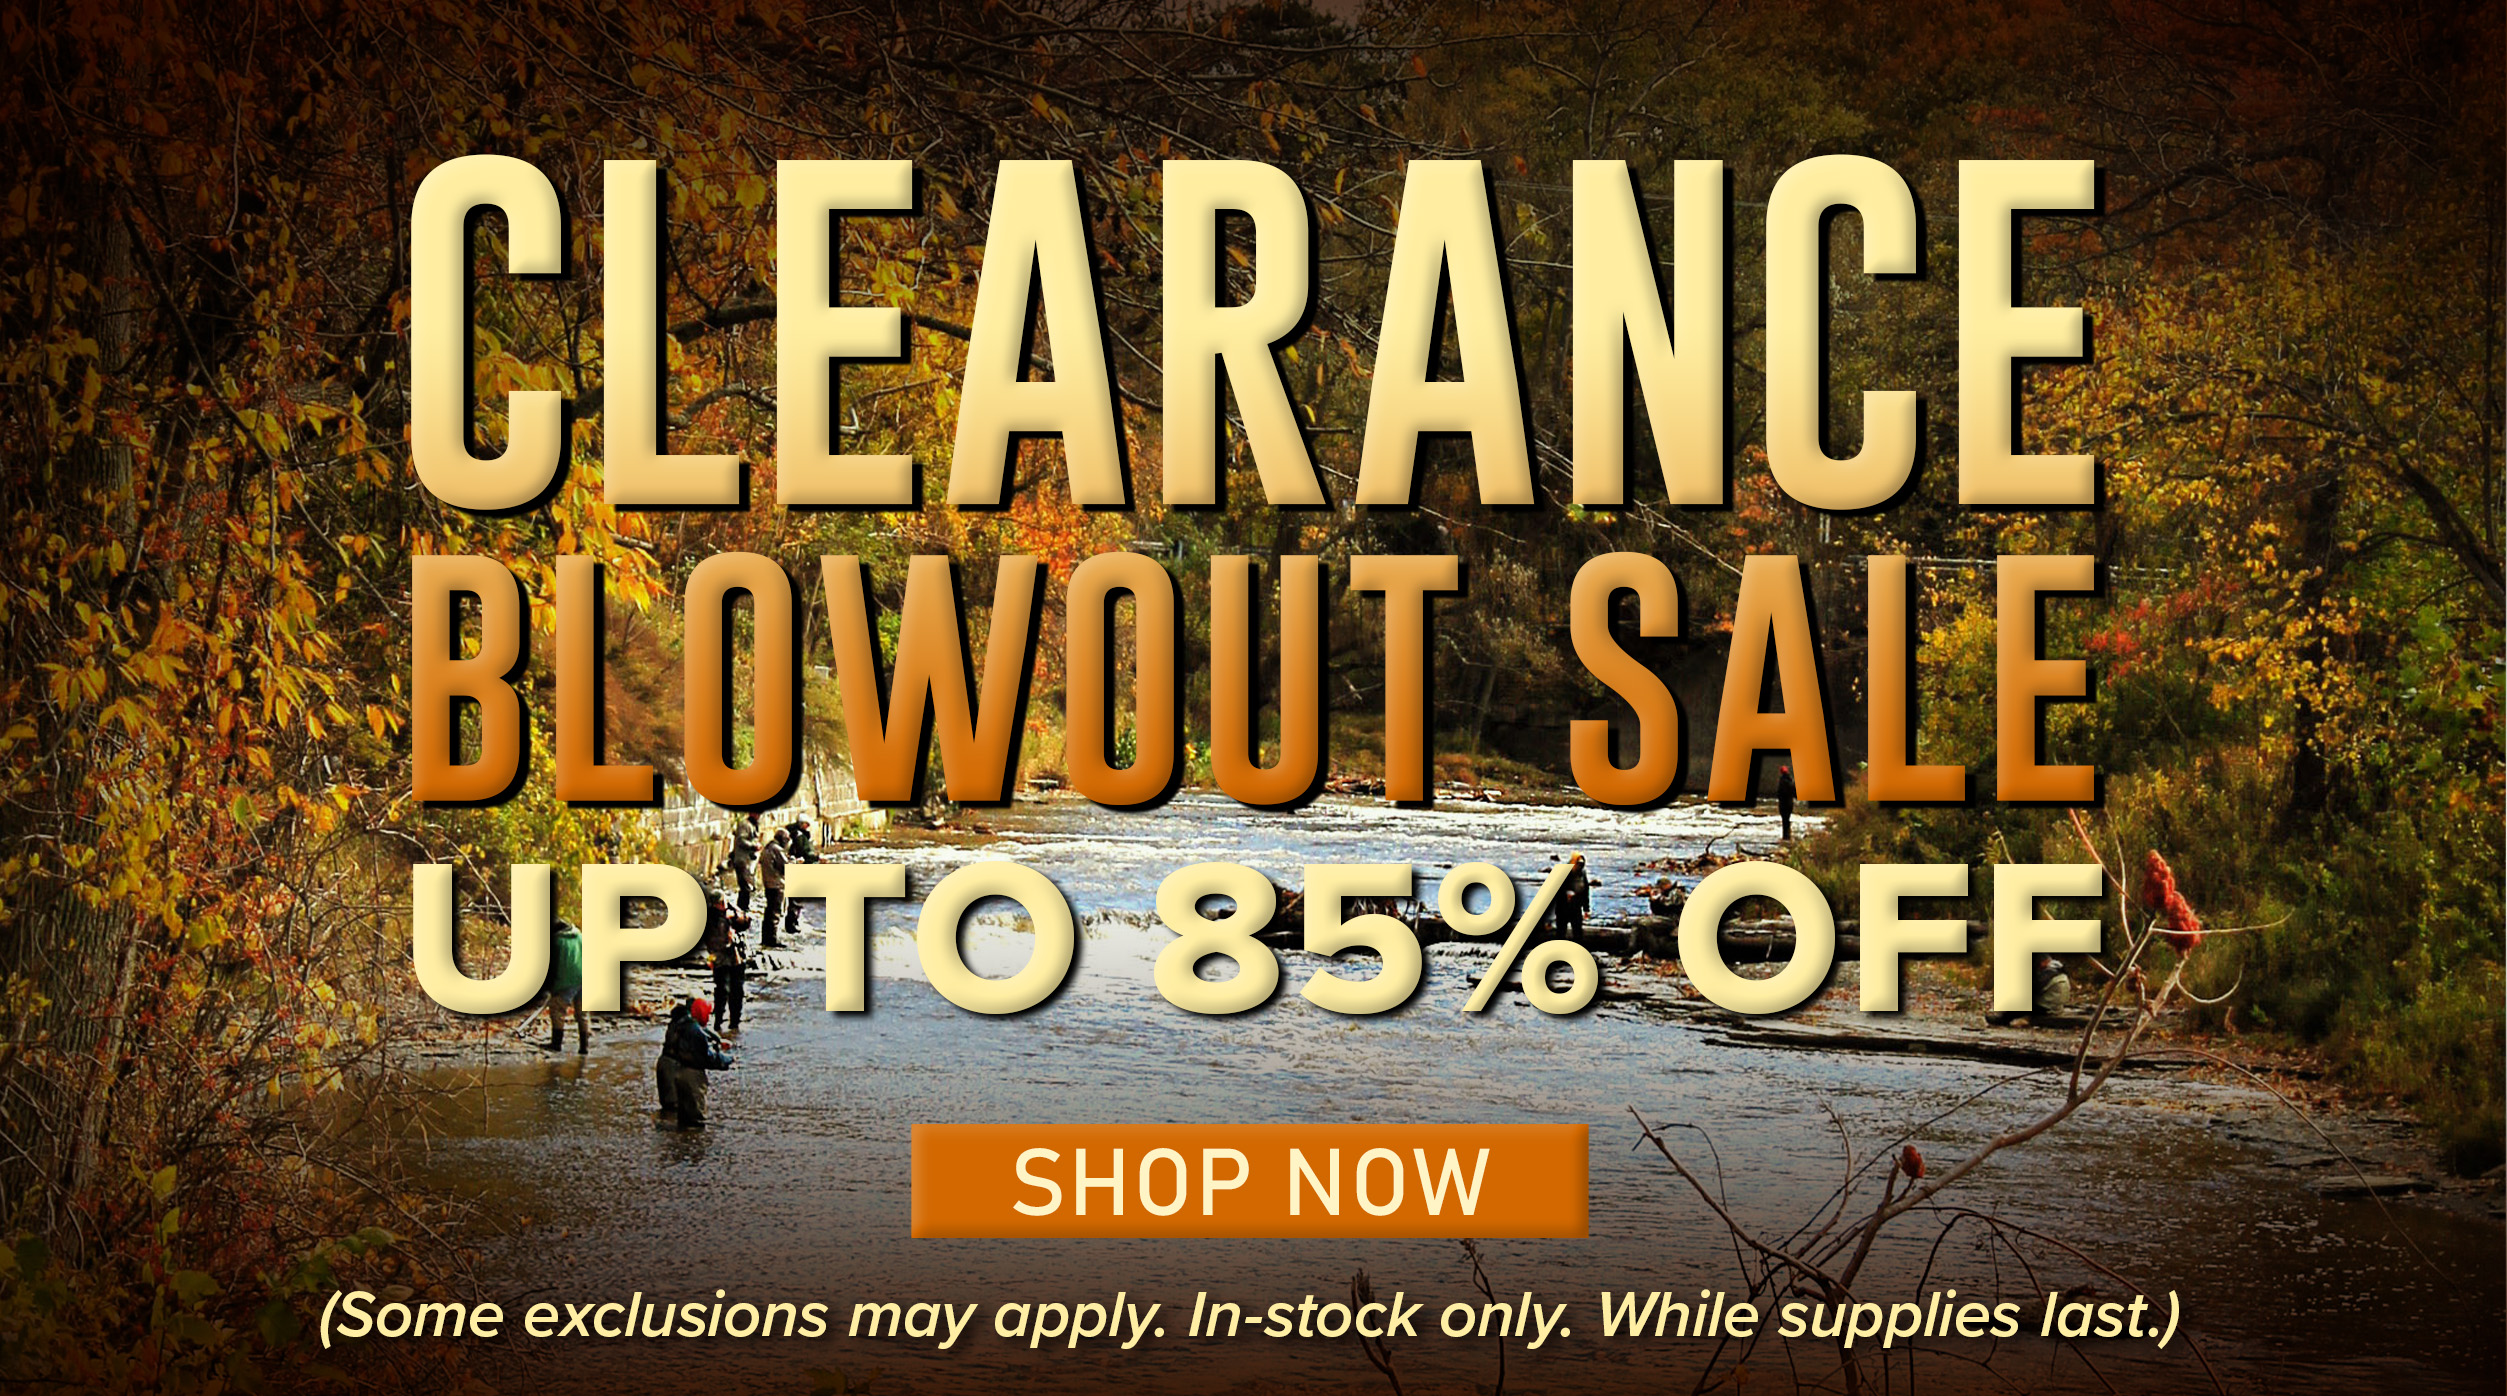 Clearance Blowout Sale Up To 85% Off Shop Now (Some exclusions apply. In-stock only. While supplies last.)